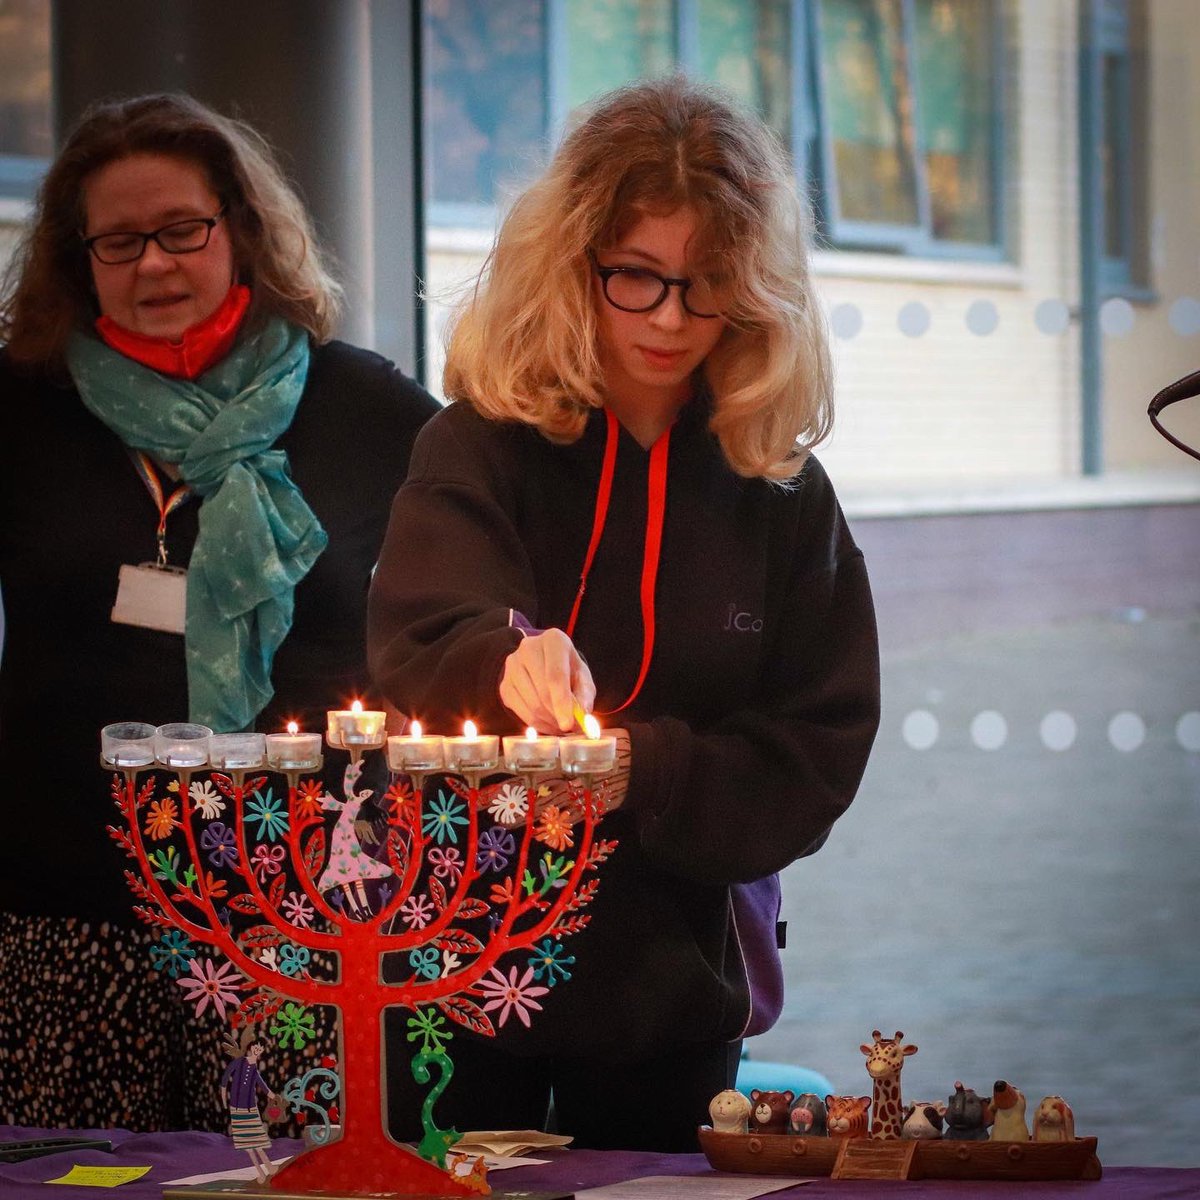 It’s night 5 of Chanukah & we would like to thank Rabbi Tanya Sakhonovich for sharing her childhood memories of Belarus & reminding us about the freedoms that this festival represents Hannah in Y10 also proudly announced our sponsored charity @survivorstrust & lit the Chanukiah!